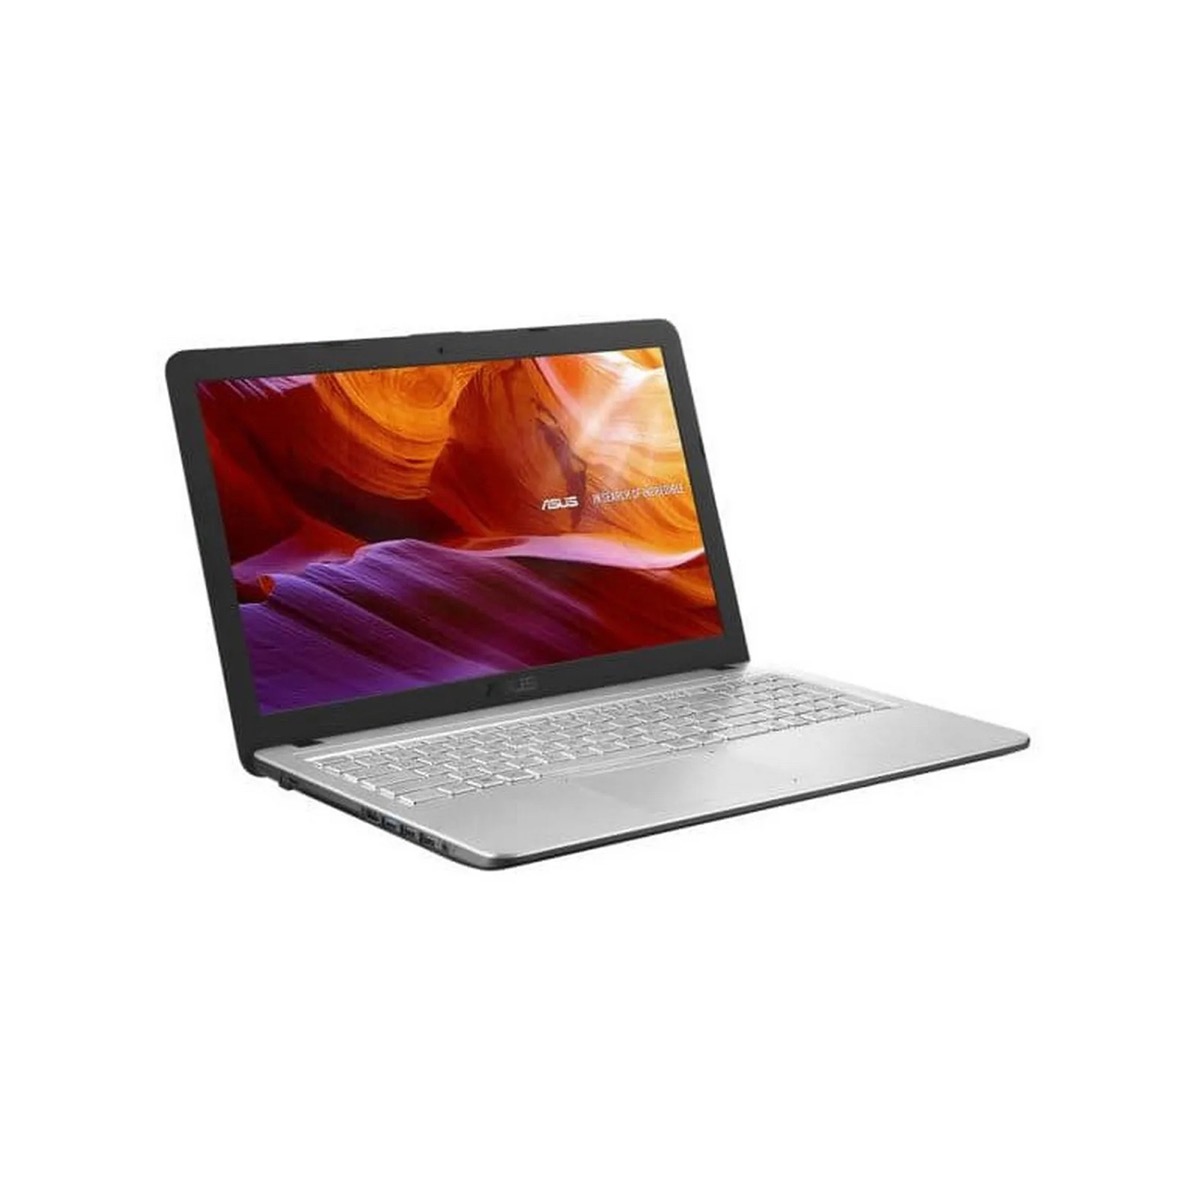 Asus-X543UA-GQ2591T-Asus-X543UA-GQ2591T-X543UA-GQ2591T-Laptops | LaptopSA.co.za a division of the notebook company 